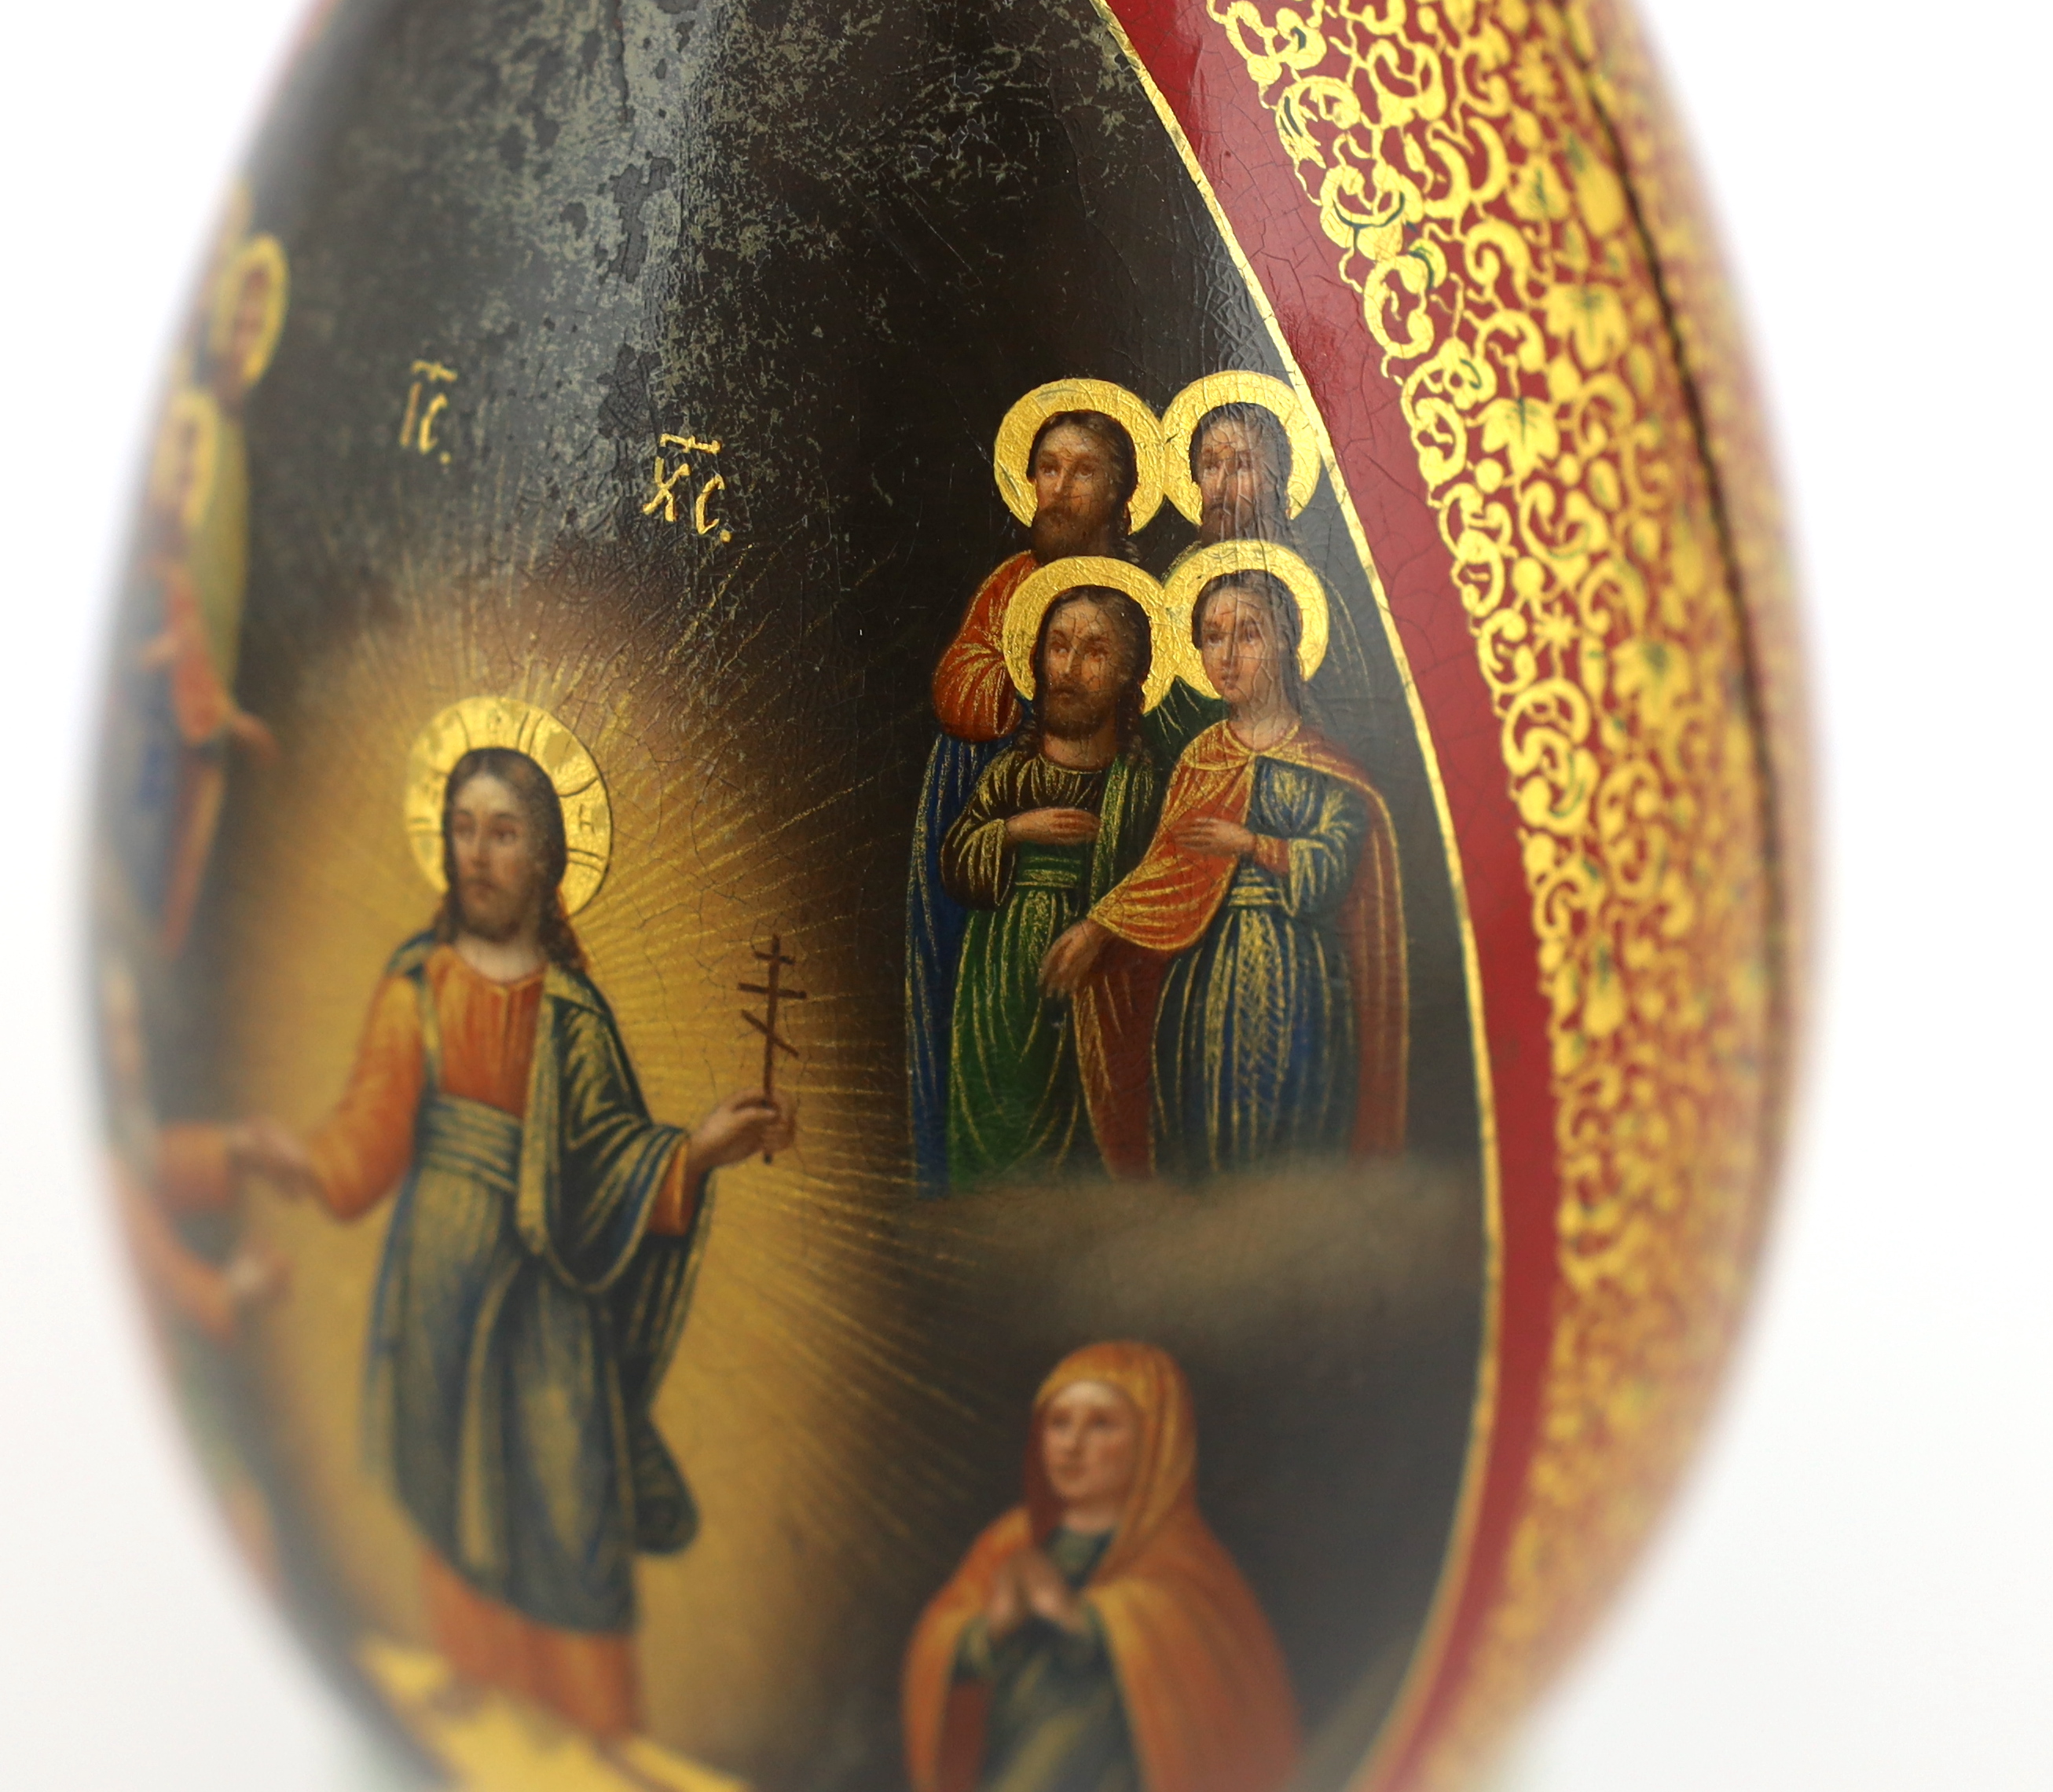 A Russian lacquer ‘Old Believers’ Easter egg, c.1860-80